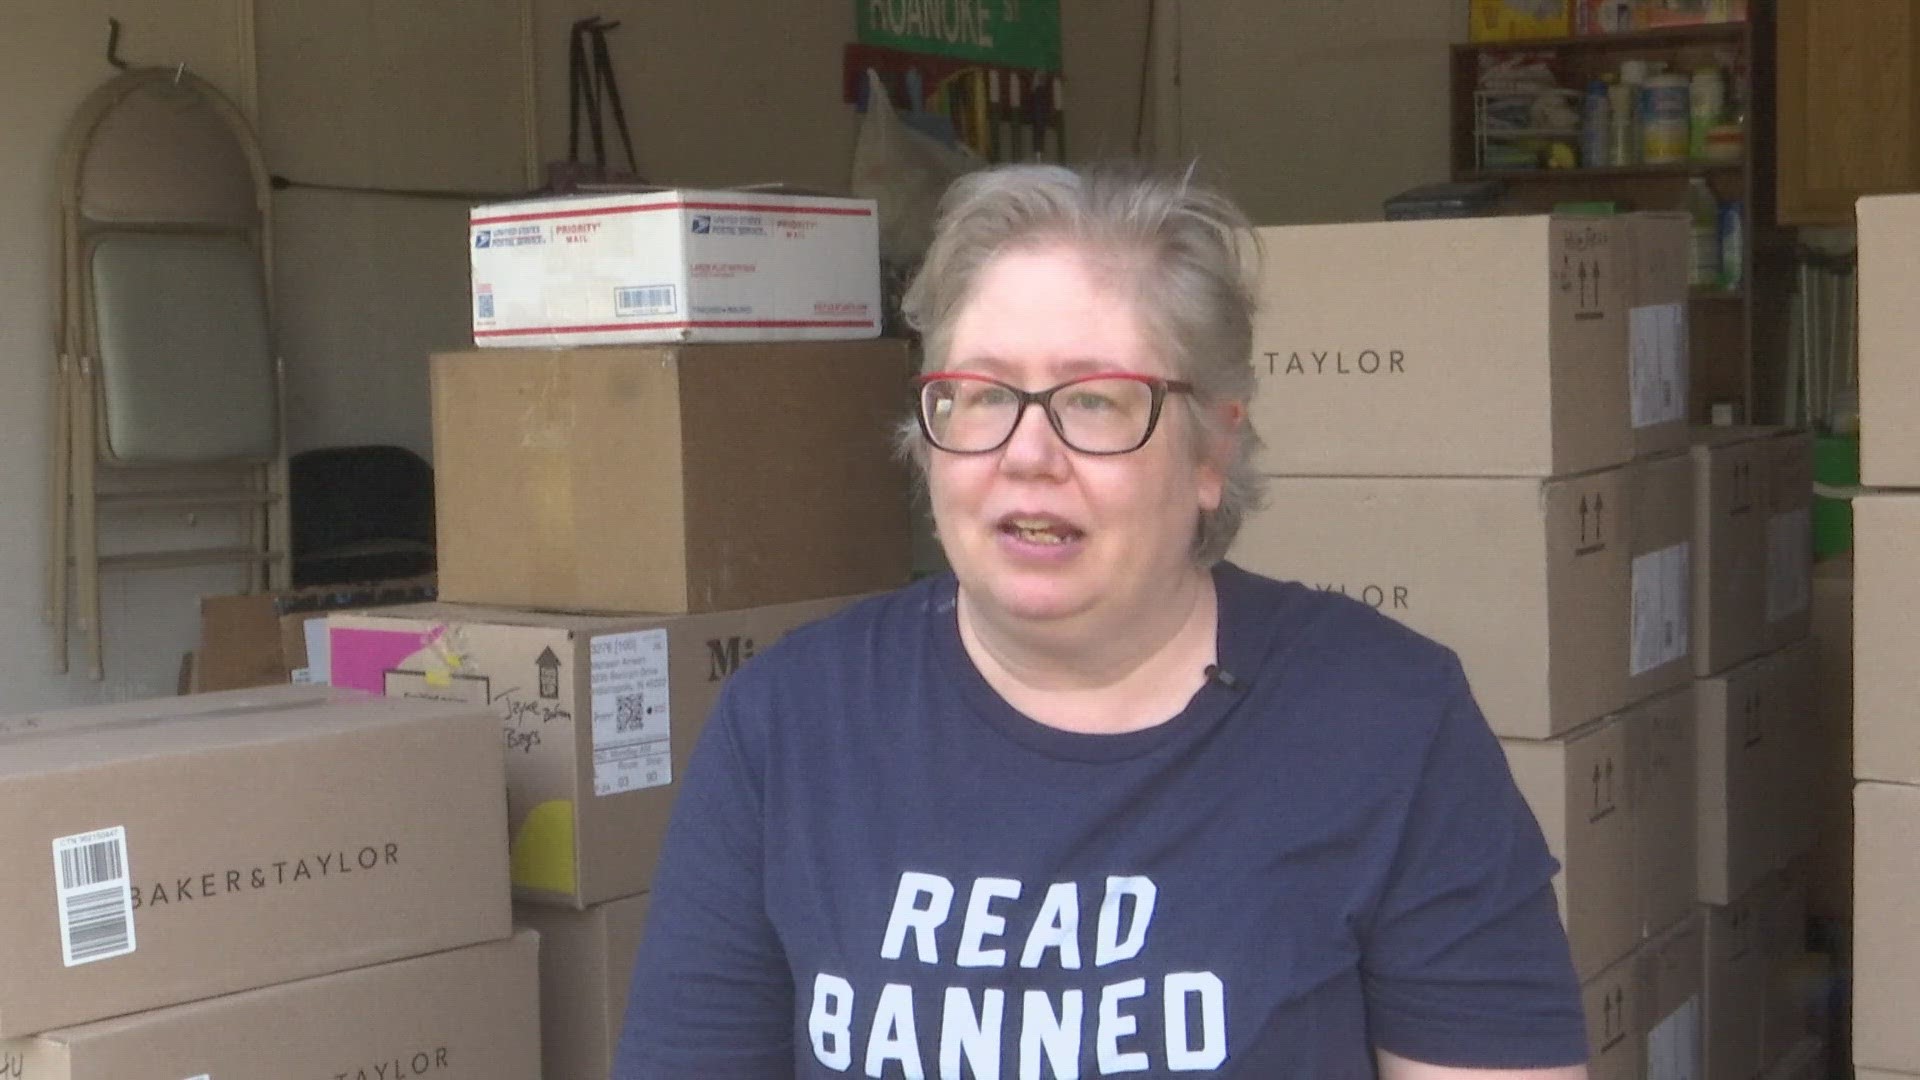 An Indiana family is packing up and moving to the East Coast. They're members of the LGBTQ community and say they no longer feel safe in this state.